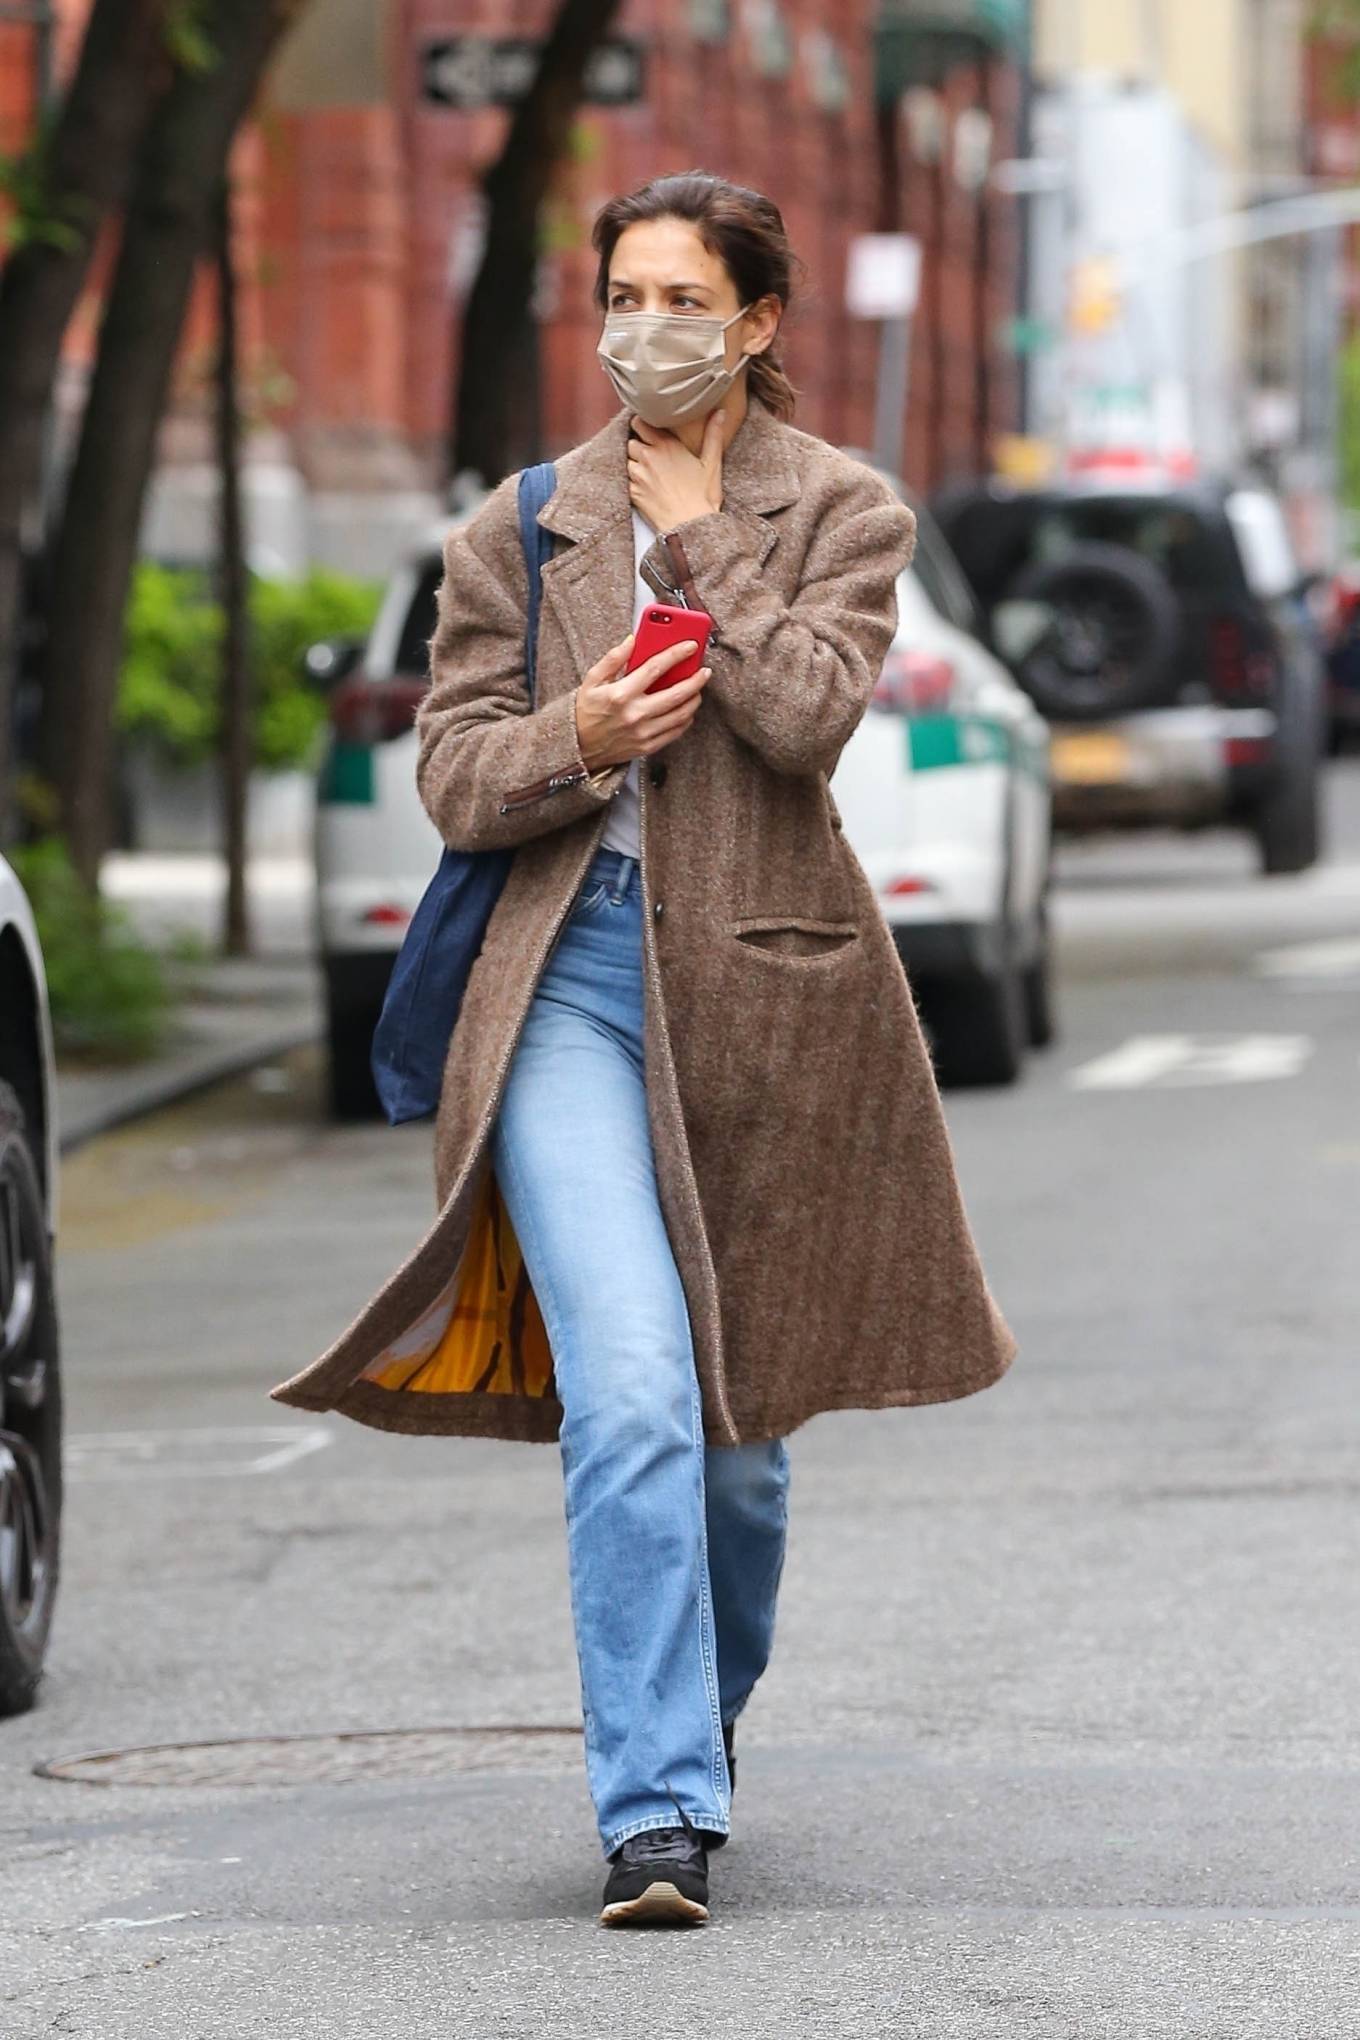 Katie Holmes 2022 : Katie Holmes – Wears a light brown coat while out in New York-03